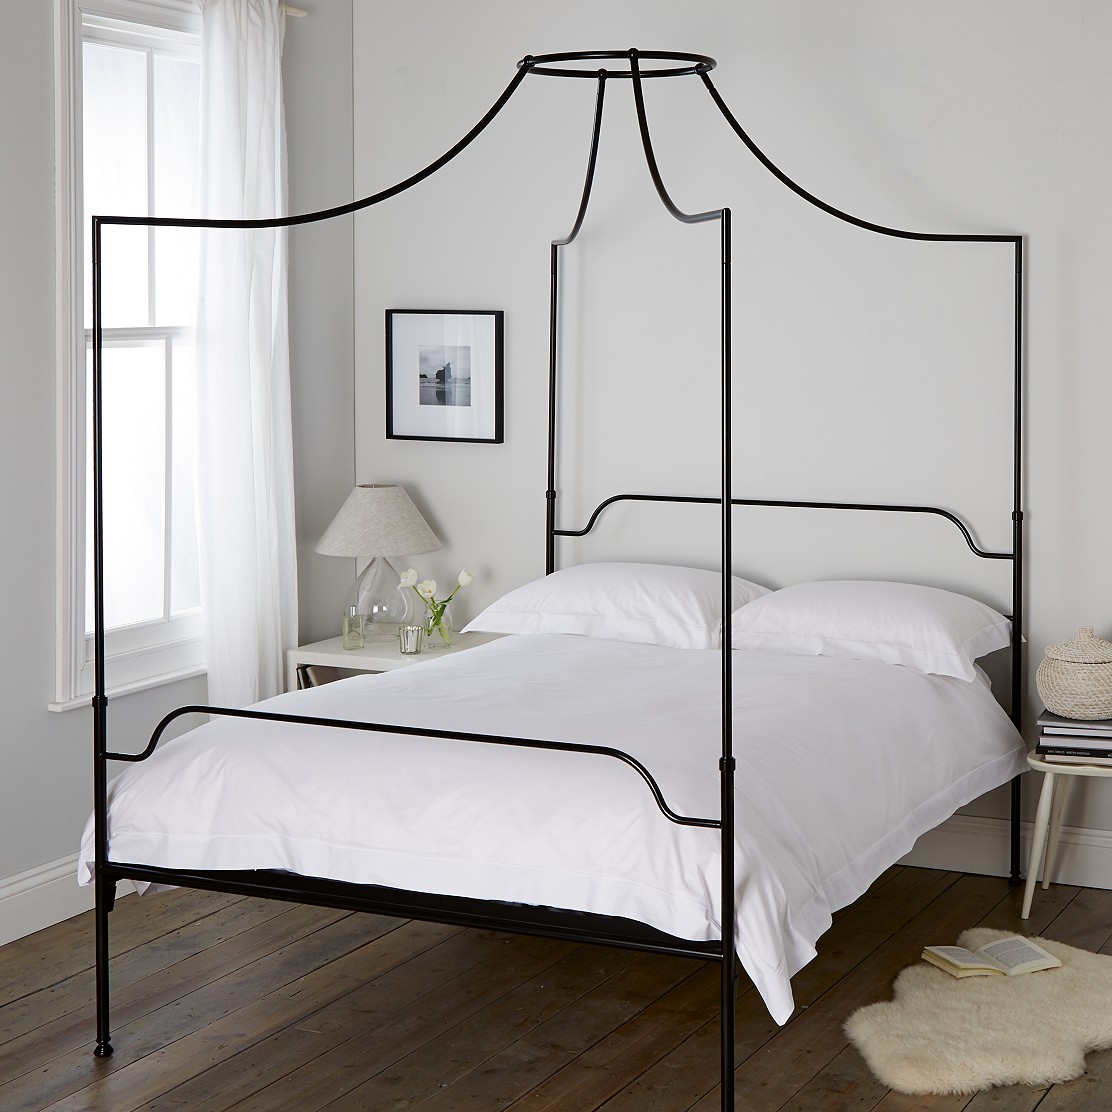 Beaumont Four Poster Bed Beds The, 4 Poster Wrought Iron Bed Frame